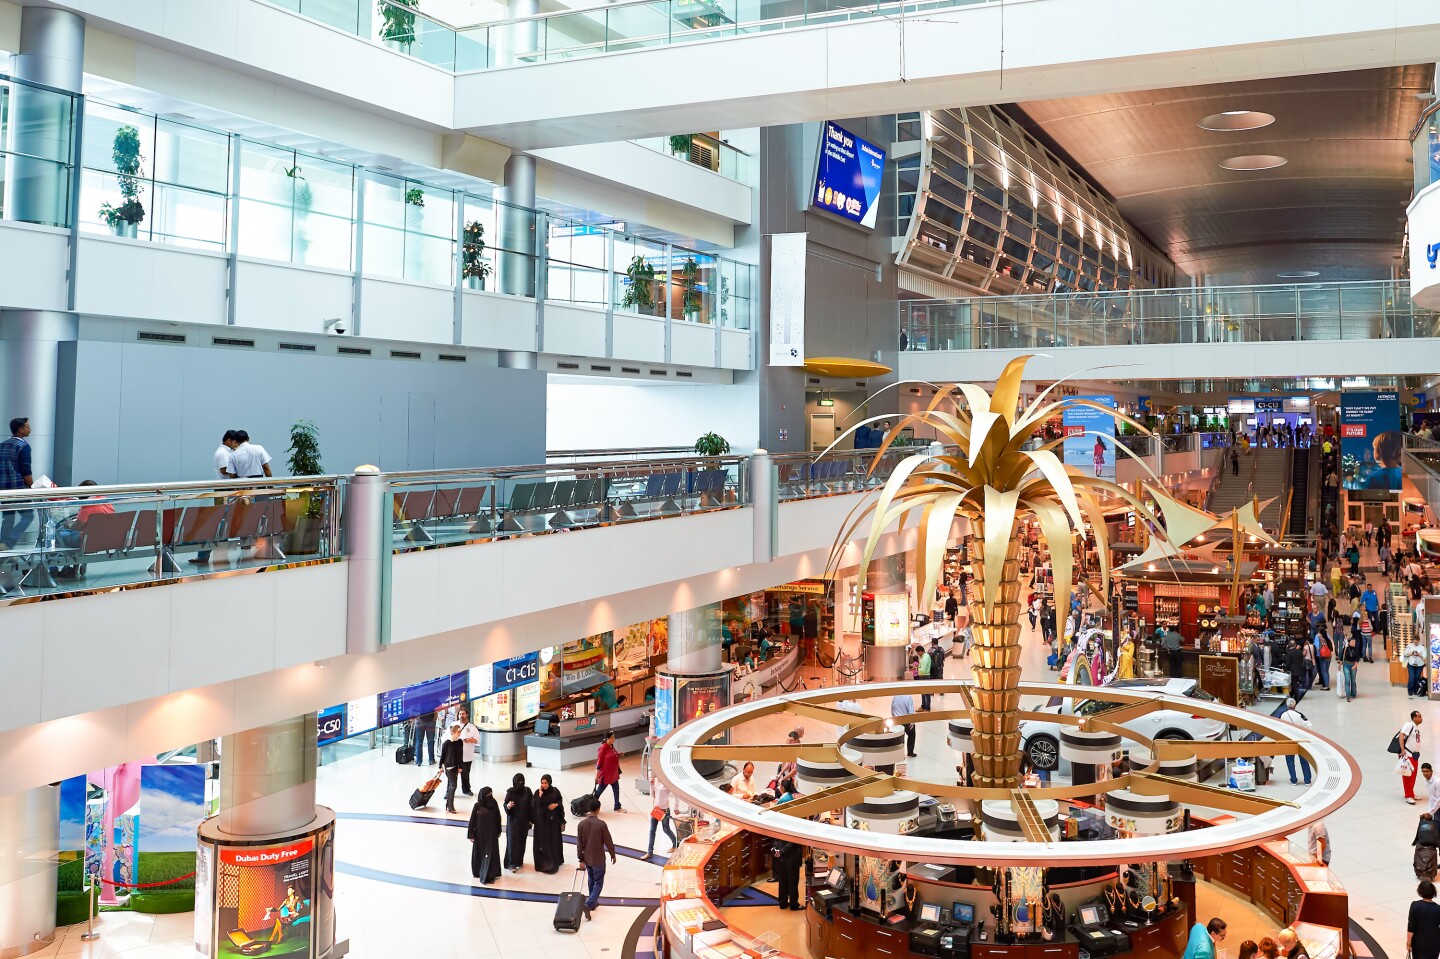 <h2>7. Dubai International Airport, United Arab Emirates</h2> <p>The <a class="Link" href="https://www.afar.com/magazine/the-busiest-airports-in-the-world" rel="noopener">second busiest airport in the world</a> in 2023 with 87 million passengers, <a class="Link" href="https://www.dubaiairports.ae/home-page" rel="noopener">Dubai International Airport</a> isn’t just a massive, bustling hub. It’s also an oasis for shopping, dining, and high-class lounges.</p> <p>Dubai’s airport comprises three terminals. Terminal 3, home to Concourse A, B, and C, is the dedicated terminal for UAE flag carrier Emirates. Terminal 2 is for charter and special-use flights, and Terminal 1 is home to the massive Concourse D, which serves all other global airlines.</p> <p>In Terminal 1, travelers will find nine lounges, including Sky Team, British Airways, and Lufthansa lounges. There is no shortage of dining and shopping options throughout the terminal, including Kitchen by Wolfgang Puck, Shake Shack, and a Hard Rock Café. For passengers flying Emirates, Terminal 3 is home to several Emirates lounges. As for shopping, Dubai Duty Free sells an average of 2.9 million bottles of perfume, 4.5 million pounds of chocolate, and nearly 6,000 pounds of gold every year, to give you a sense of just how much retail therapy happens at this hub.</p>